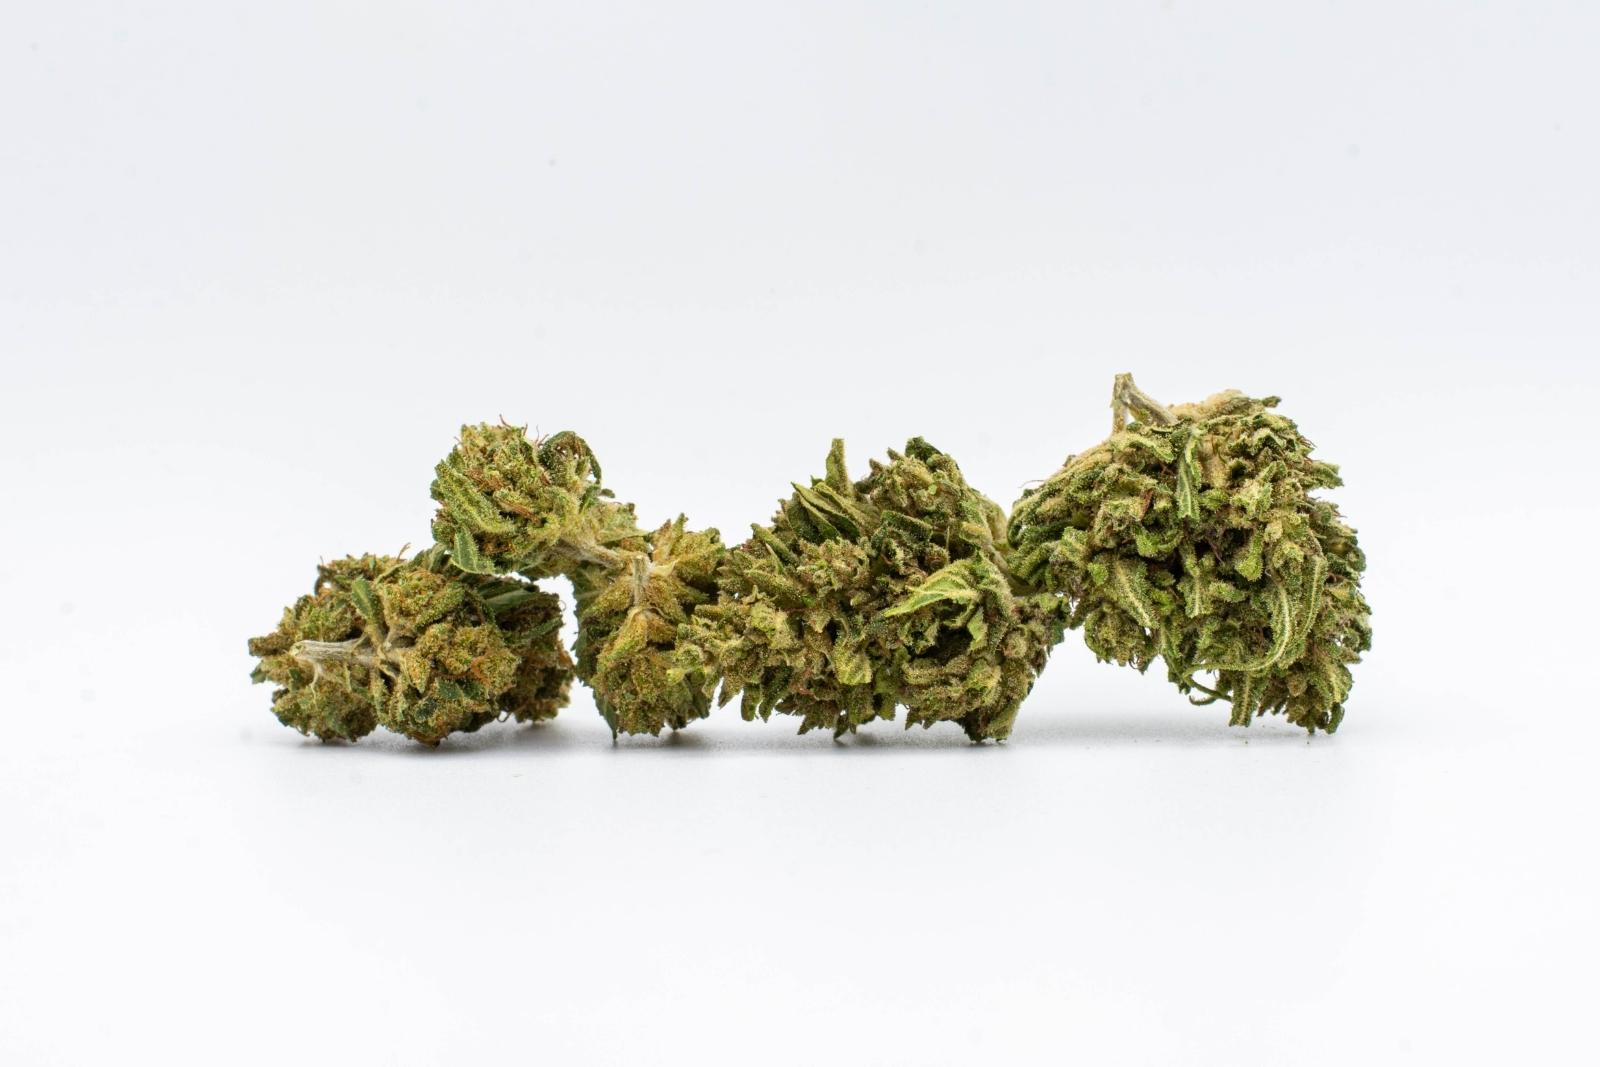 A group of Sour Pineapple hemp flower nugs by East Fork Cultivars, on a white background